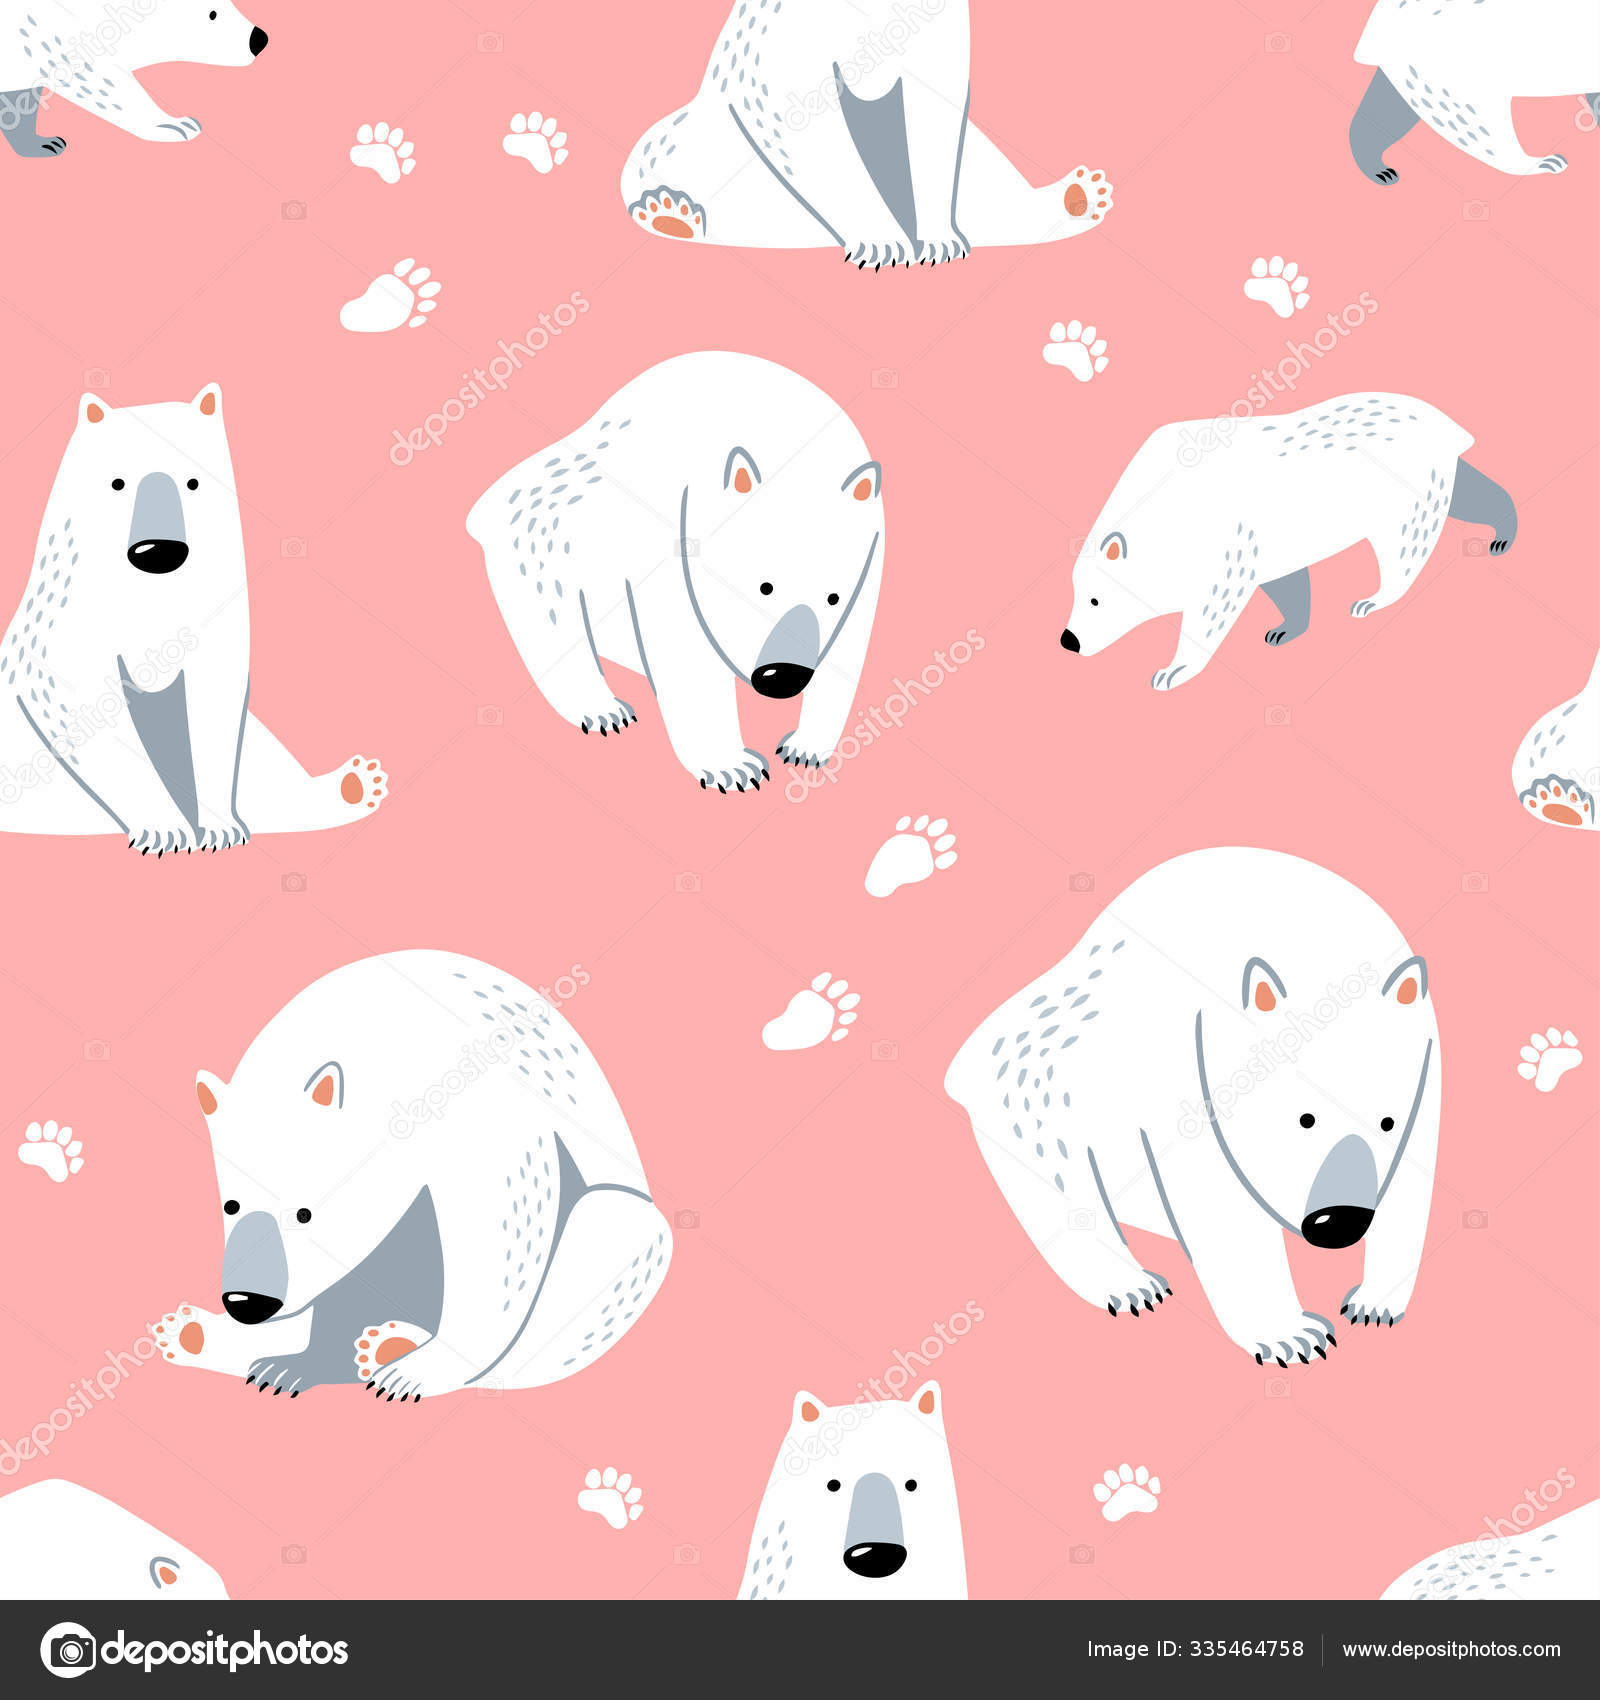 Seamless Polar Bear Pattern With Pink Background Cute Bear Cartoon Vector Illustration Can Be Used For Textile Poster Wallpaper Birthday Card Vector Image By C Kilniants Vector Stock